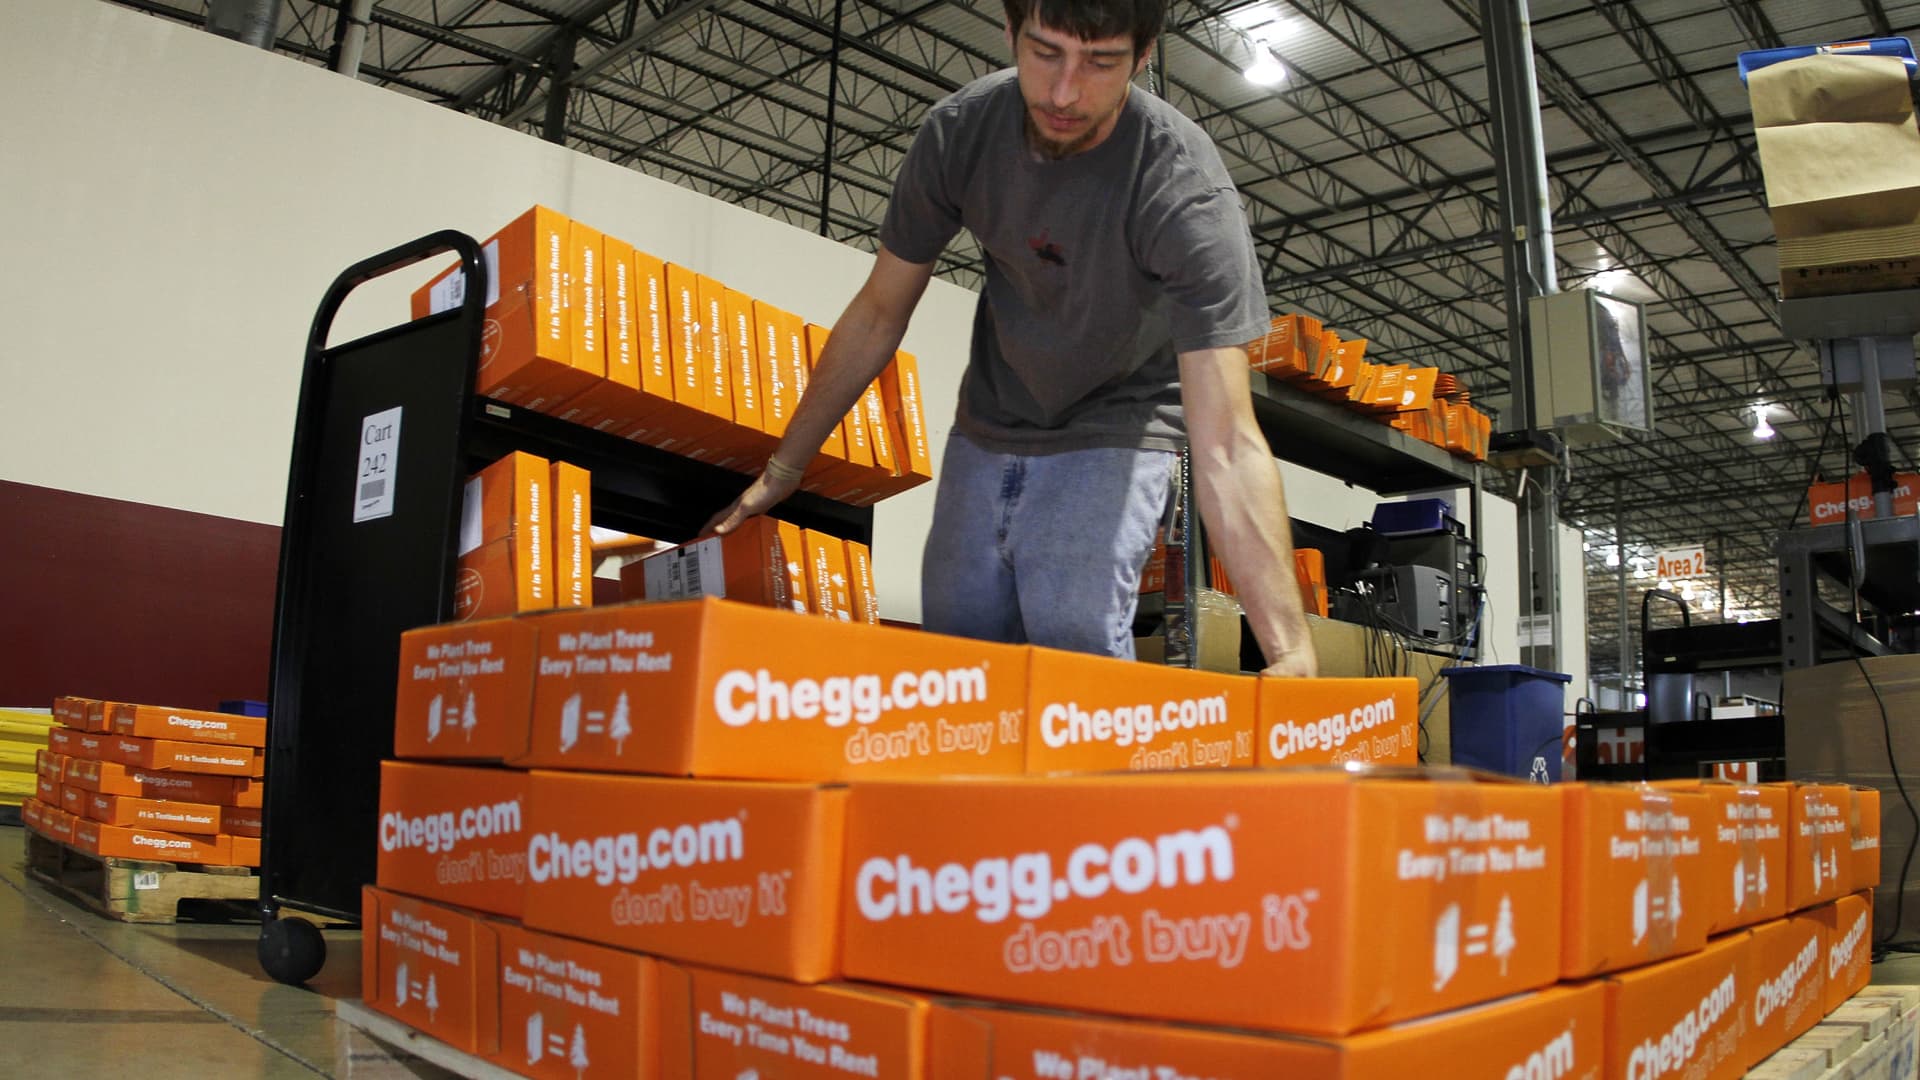 James Tahaney loads textbooks on to a pallet in preparation for shipping at the Chegg warehouse in Shepherdsville, Kentucky, April 29, 2010.